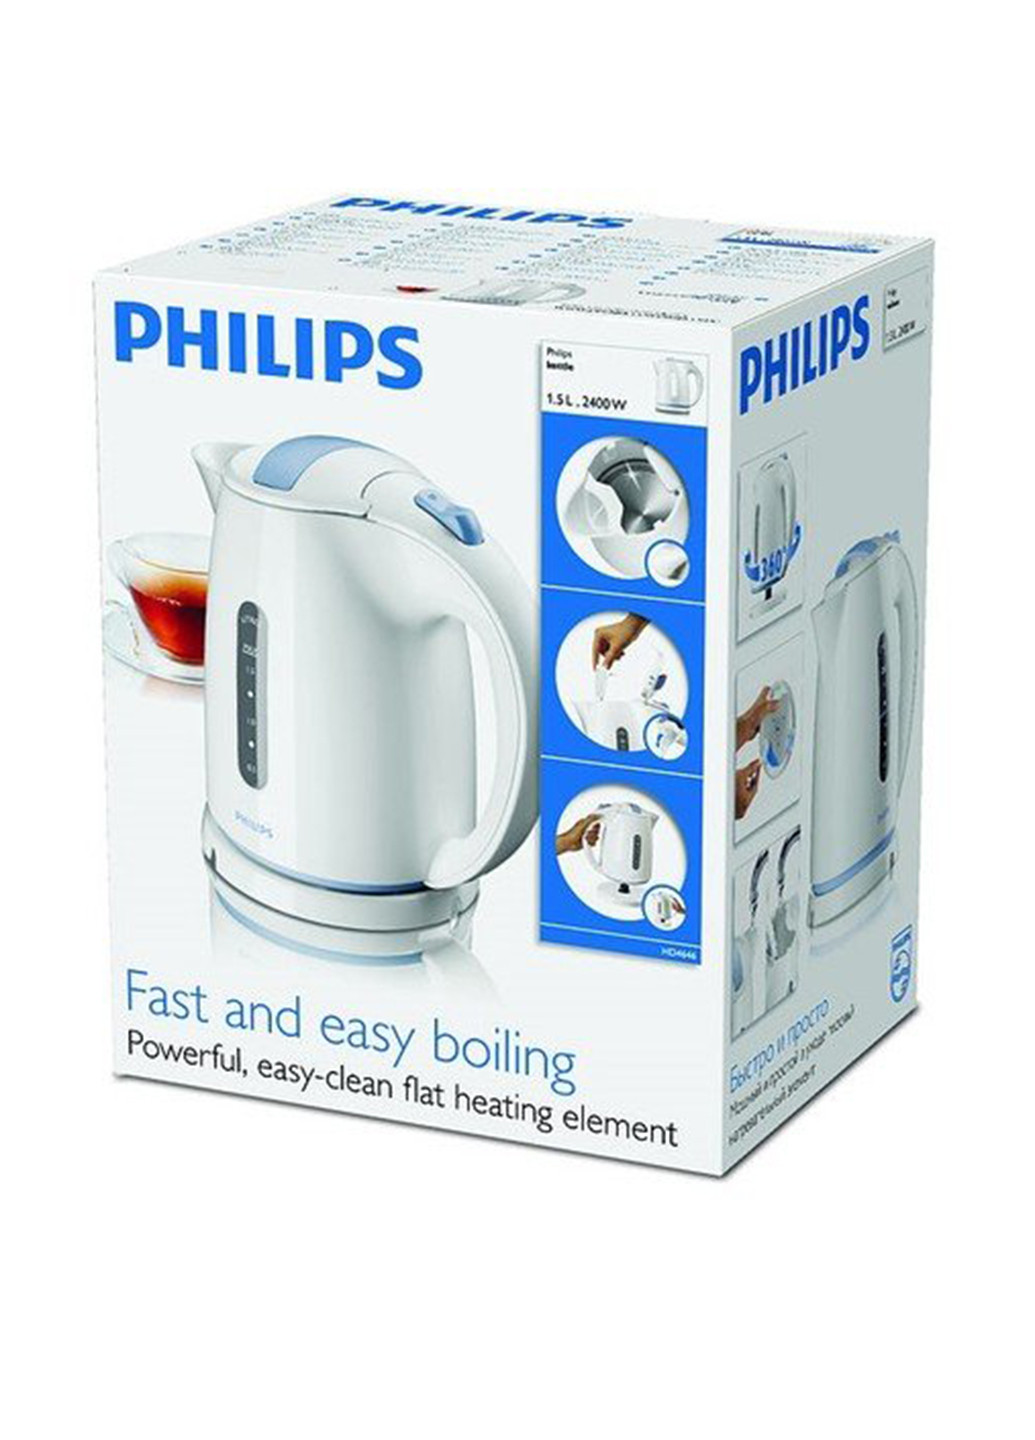 Електрочайник Daily Collection HD4646 / 70 White-Blue Philips hd4646/70 (136737044)